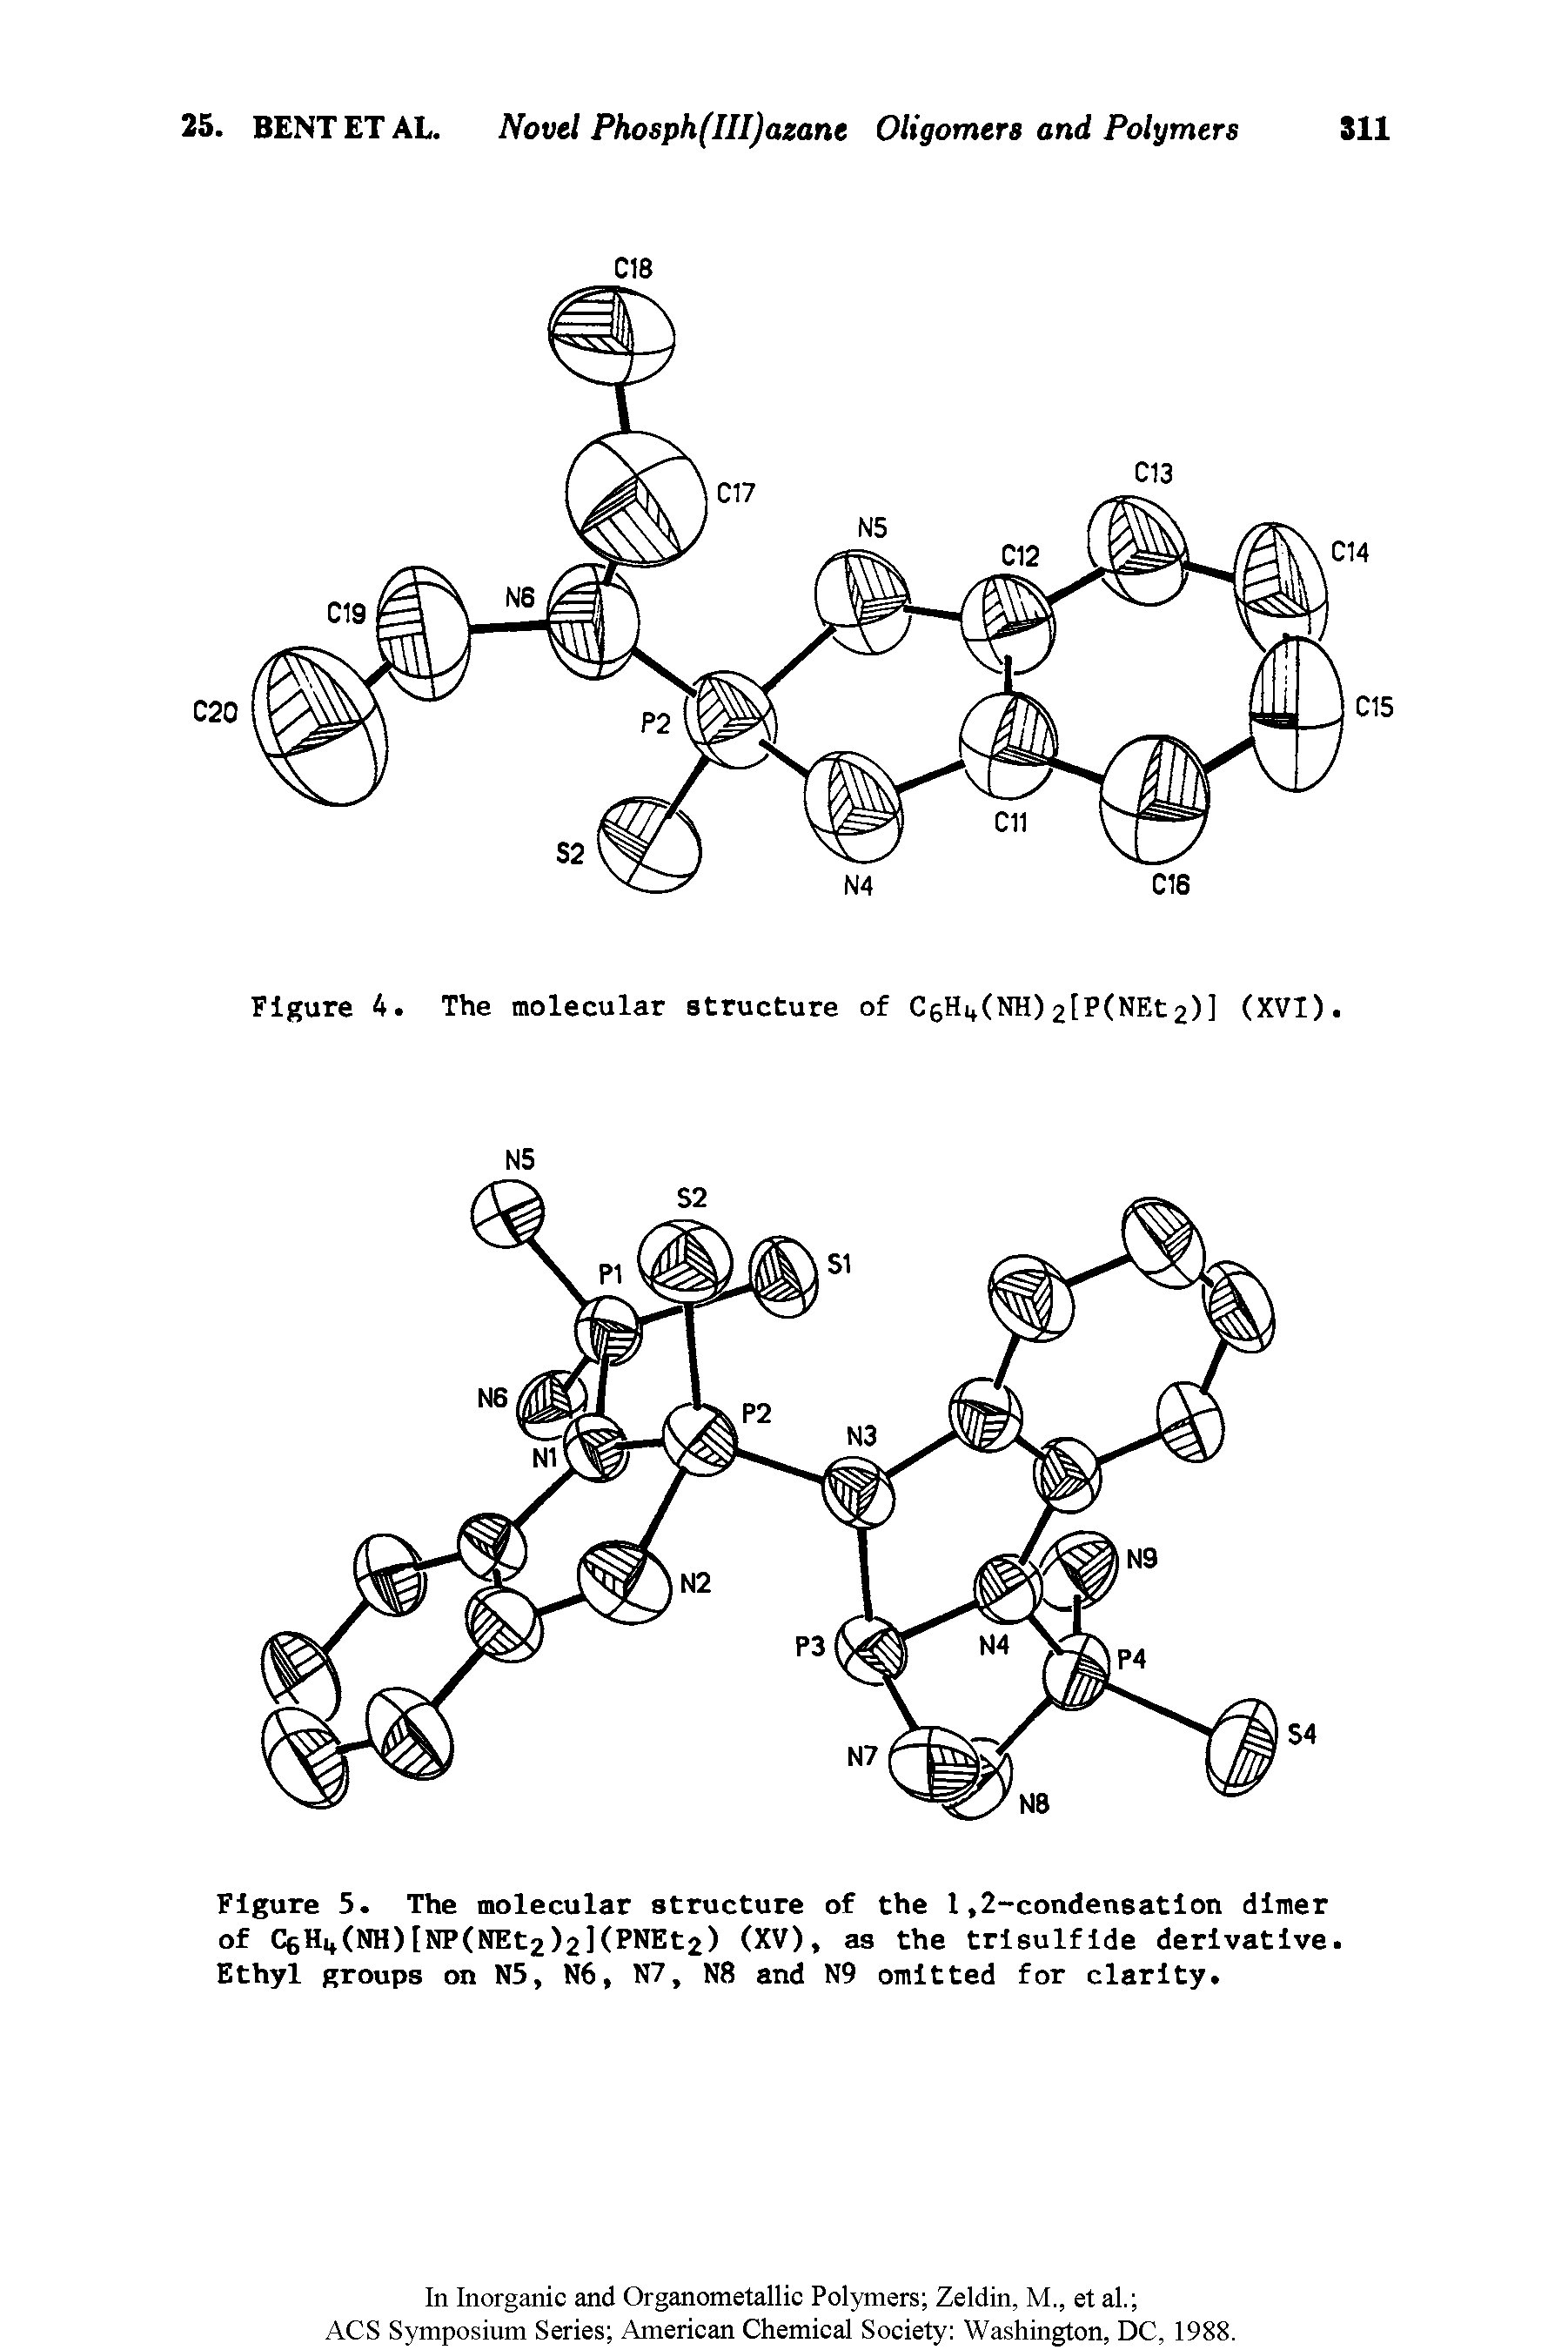 Figure 5. The molecular structure of the 1,2-condensation dimer of CgHi,(NH)[NP(NEt2)2KPNEt2) (XV), as the trisulfide derivative. Ethyl groups on N5, N6, N7, N8 and N9 omitted for clarity.